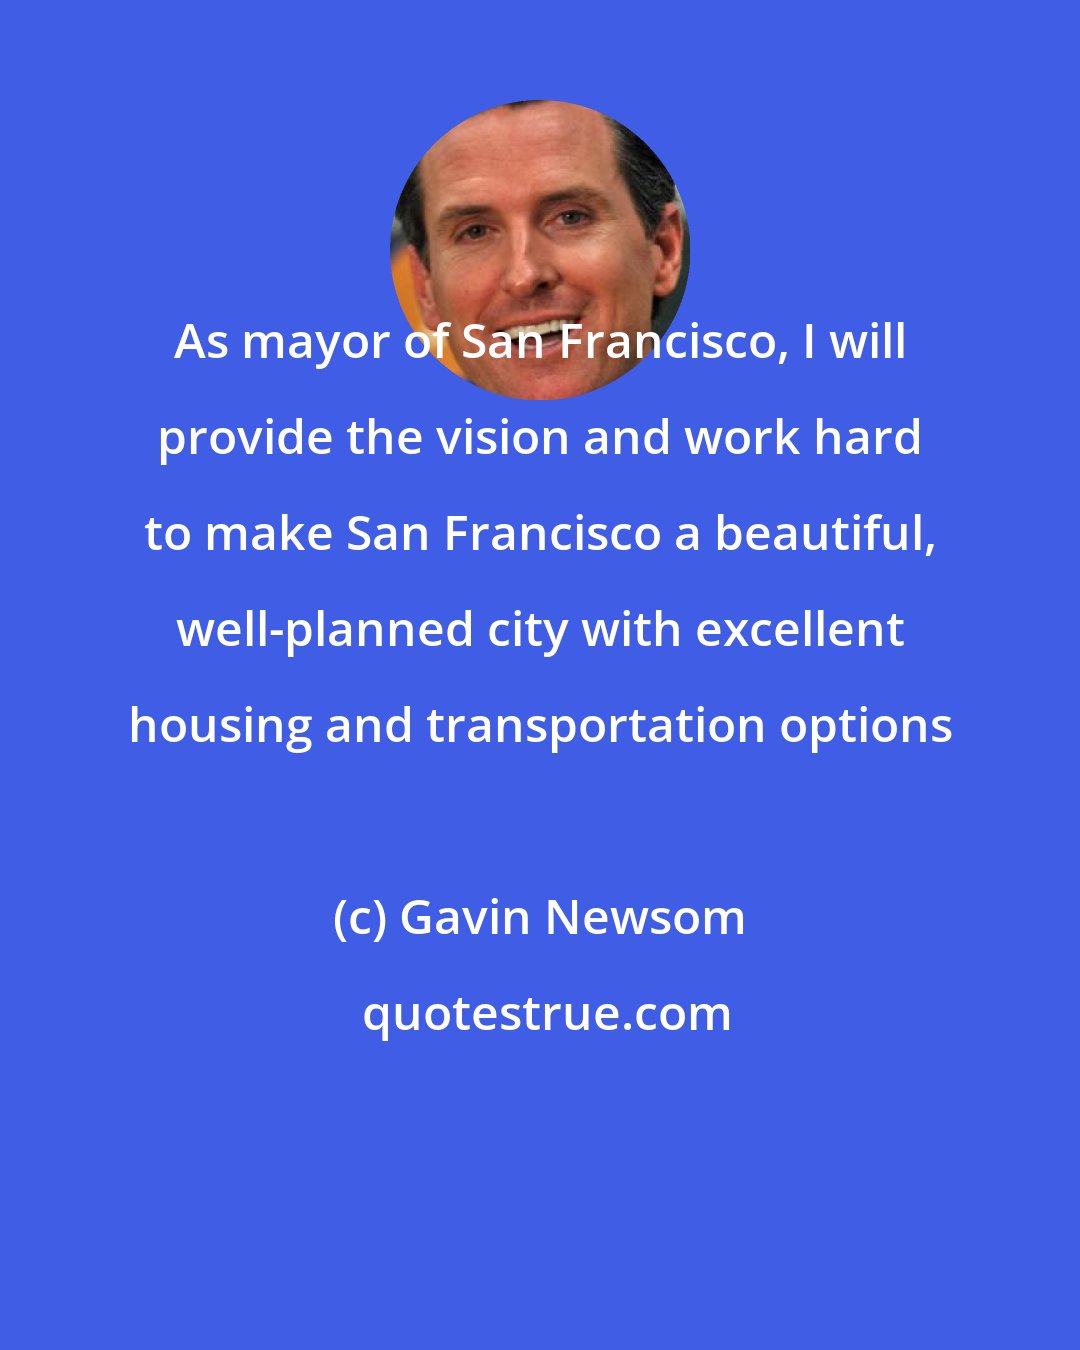 Gavin Newsom: As mayor of San Francisco, I will provide the vision and work hard to make San Francisco a beautiful, well-planned city with excellent housing and transportation options